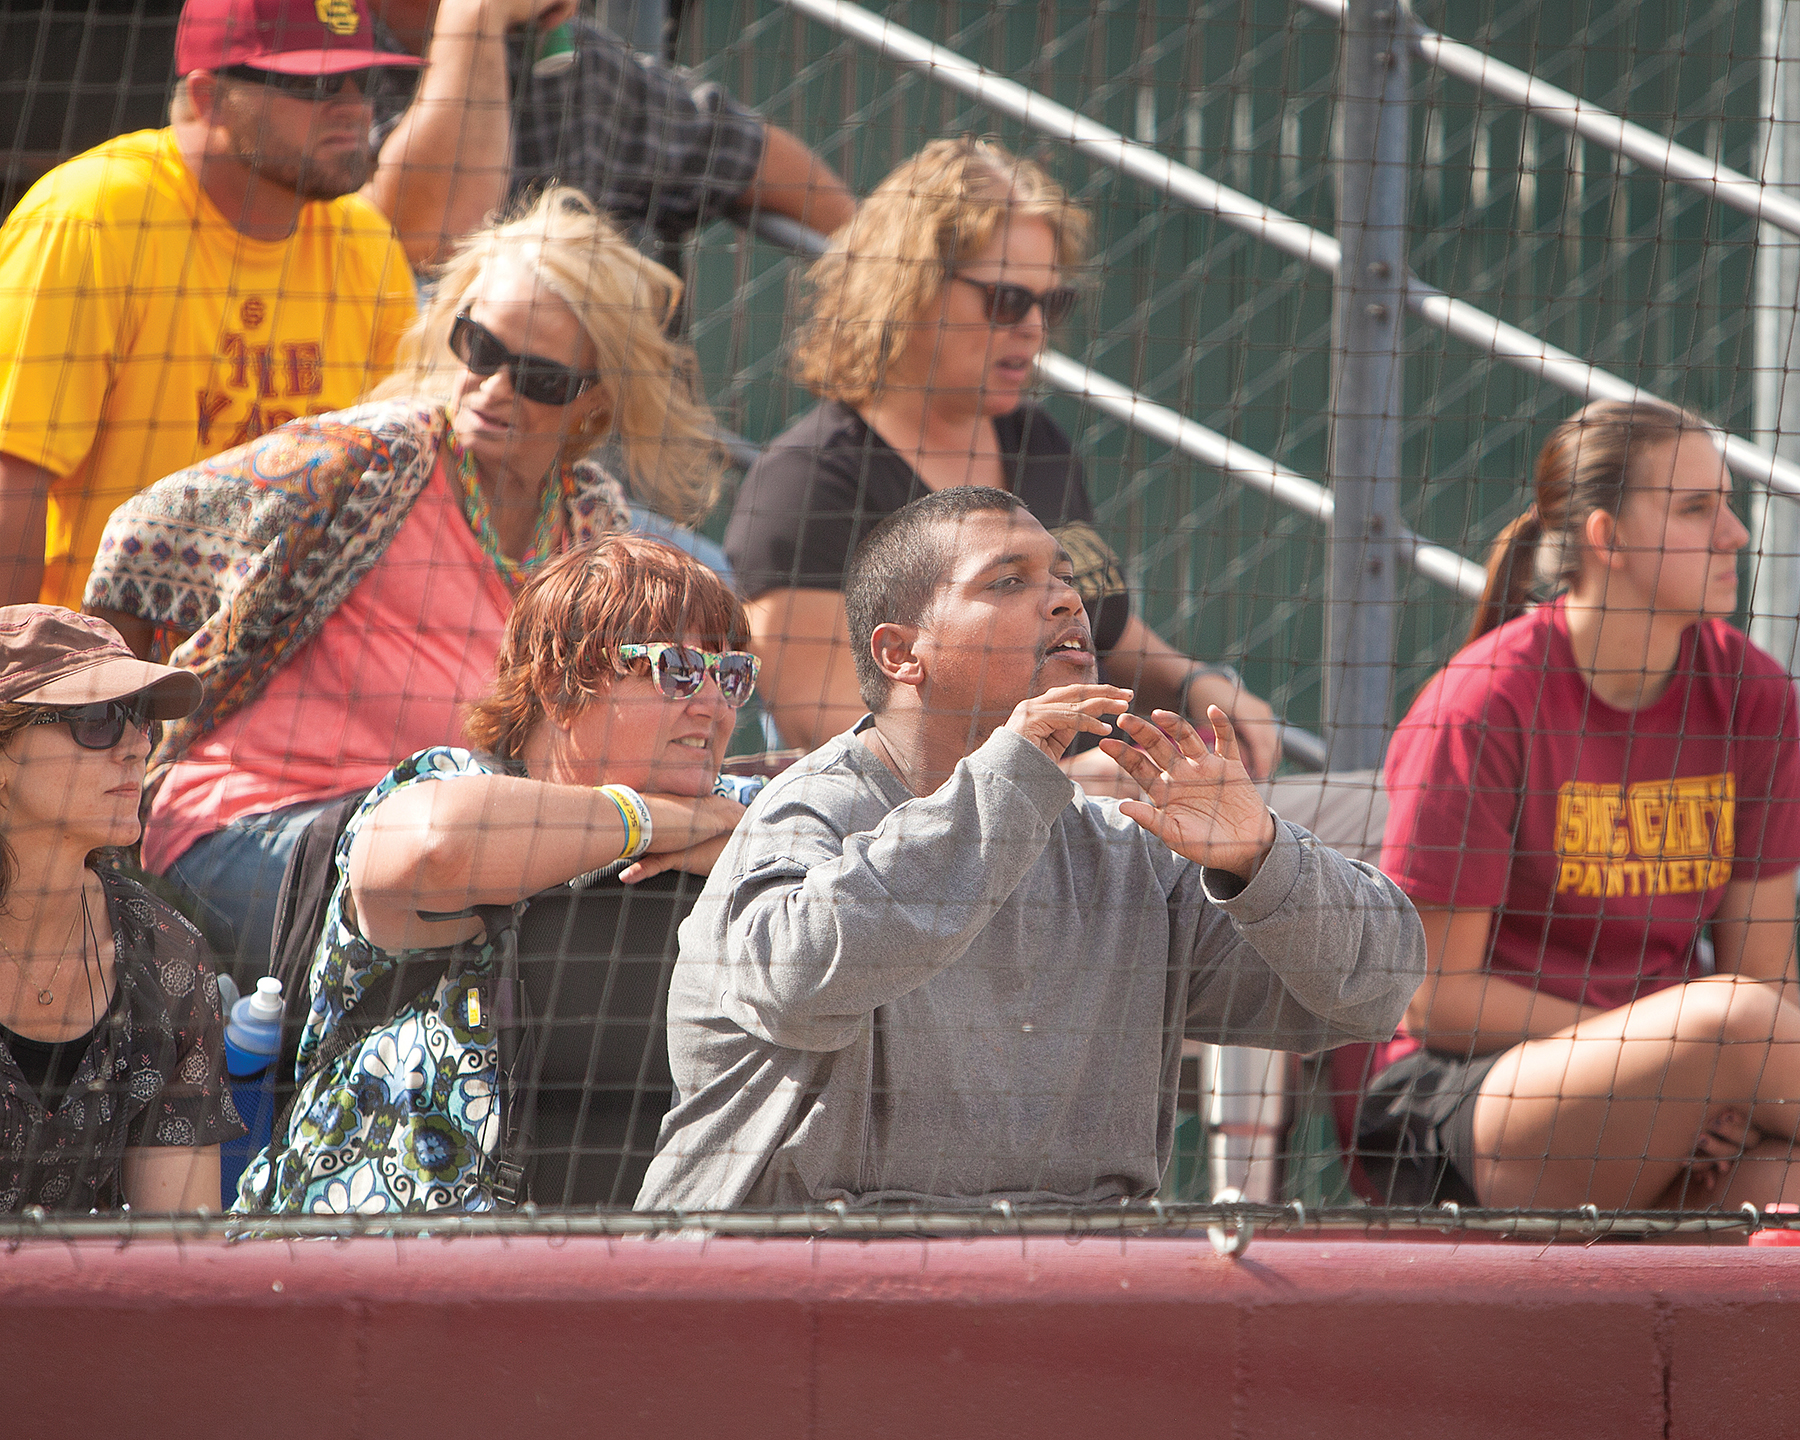 City College softball fan Anthony Federer cheers from behind home plate in the game against San Joaquin Delta College at The Yard on April 21st. Dianne Rose/diannekayphotos@gmail.com